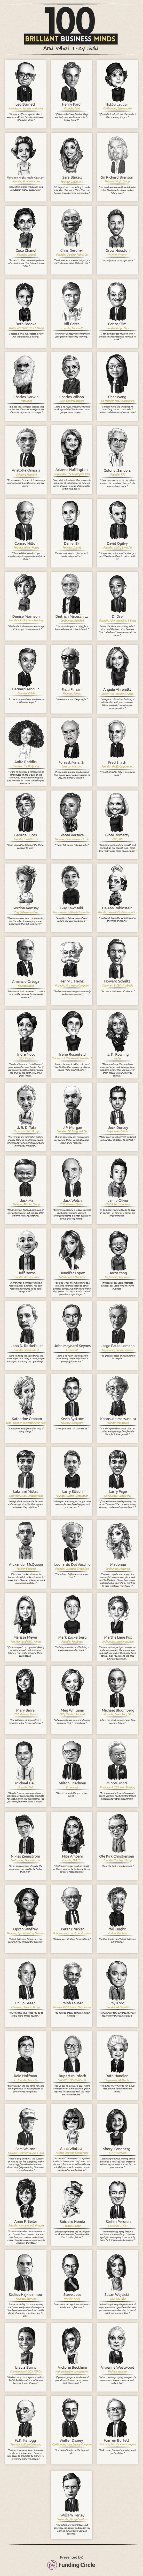 100 brilliant business minds - infographic